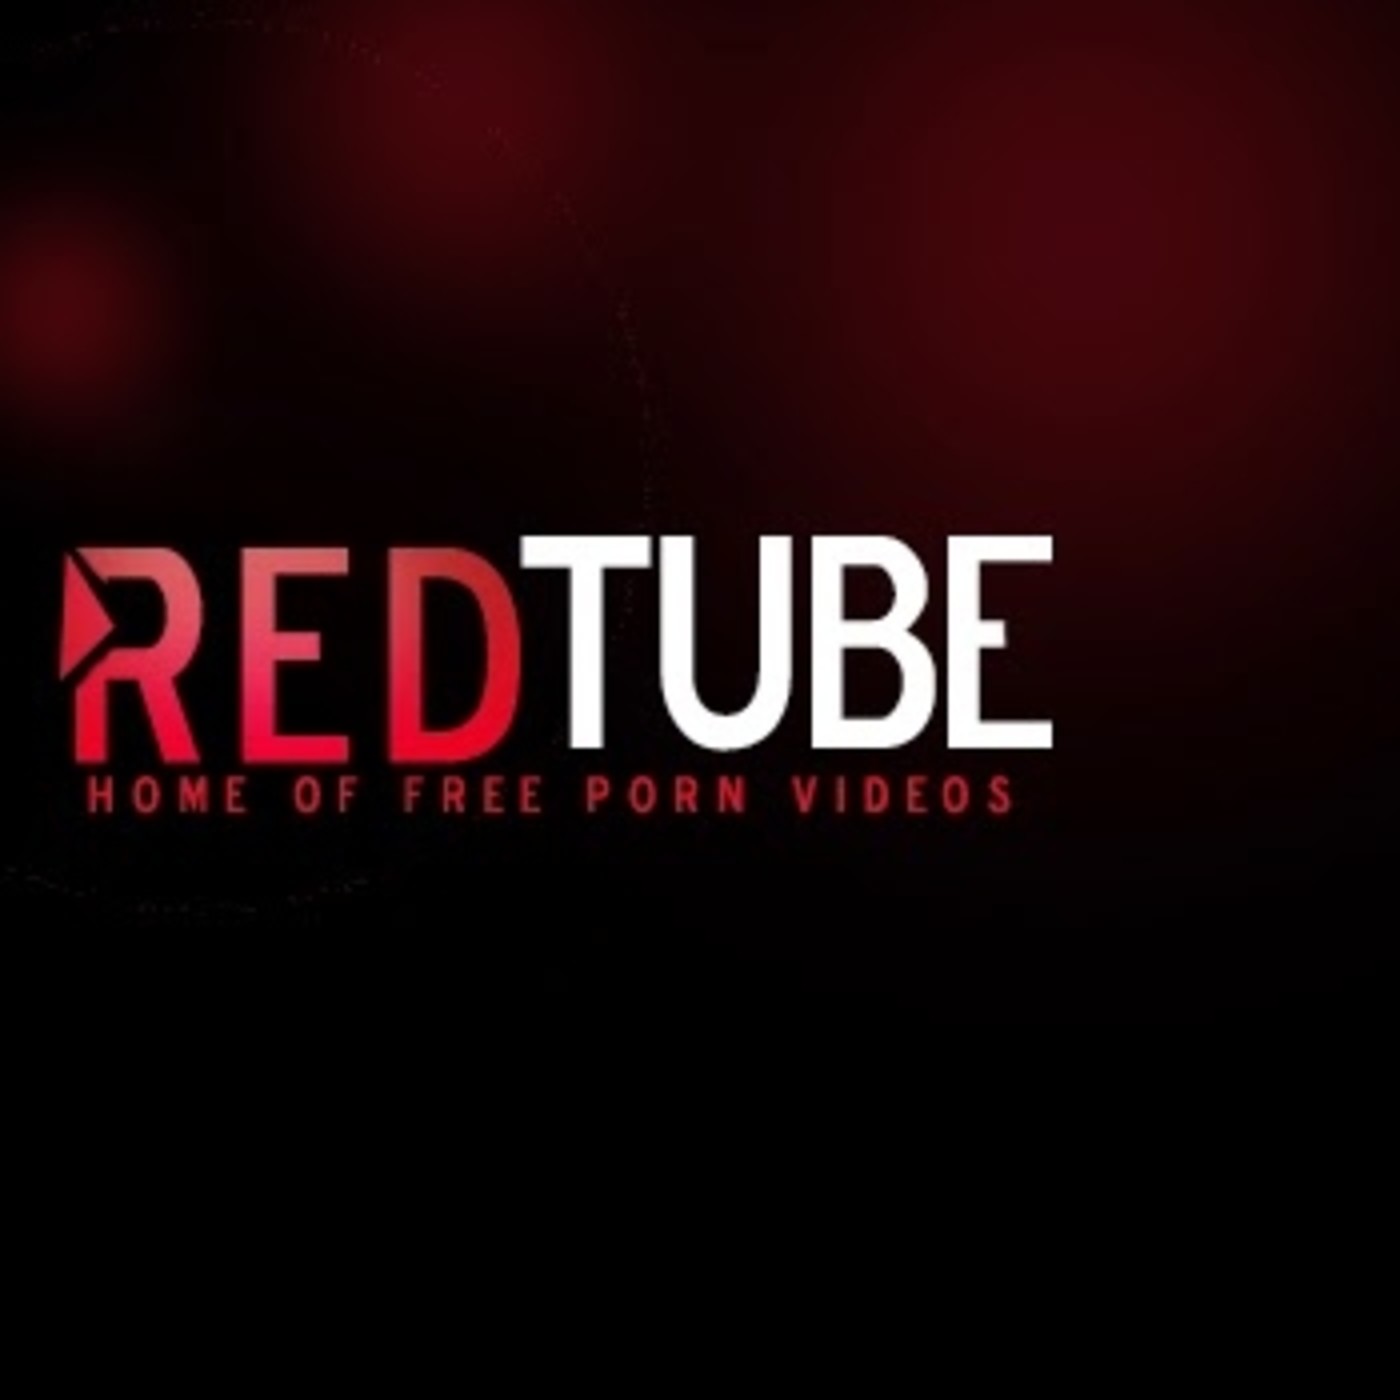 Red tuibe